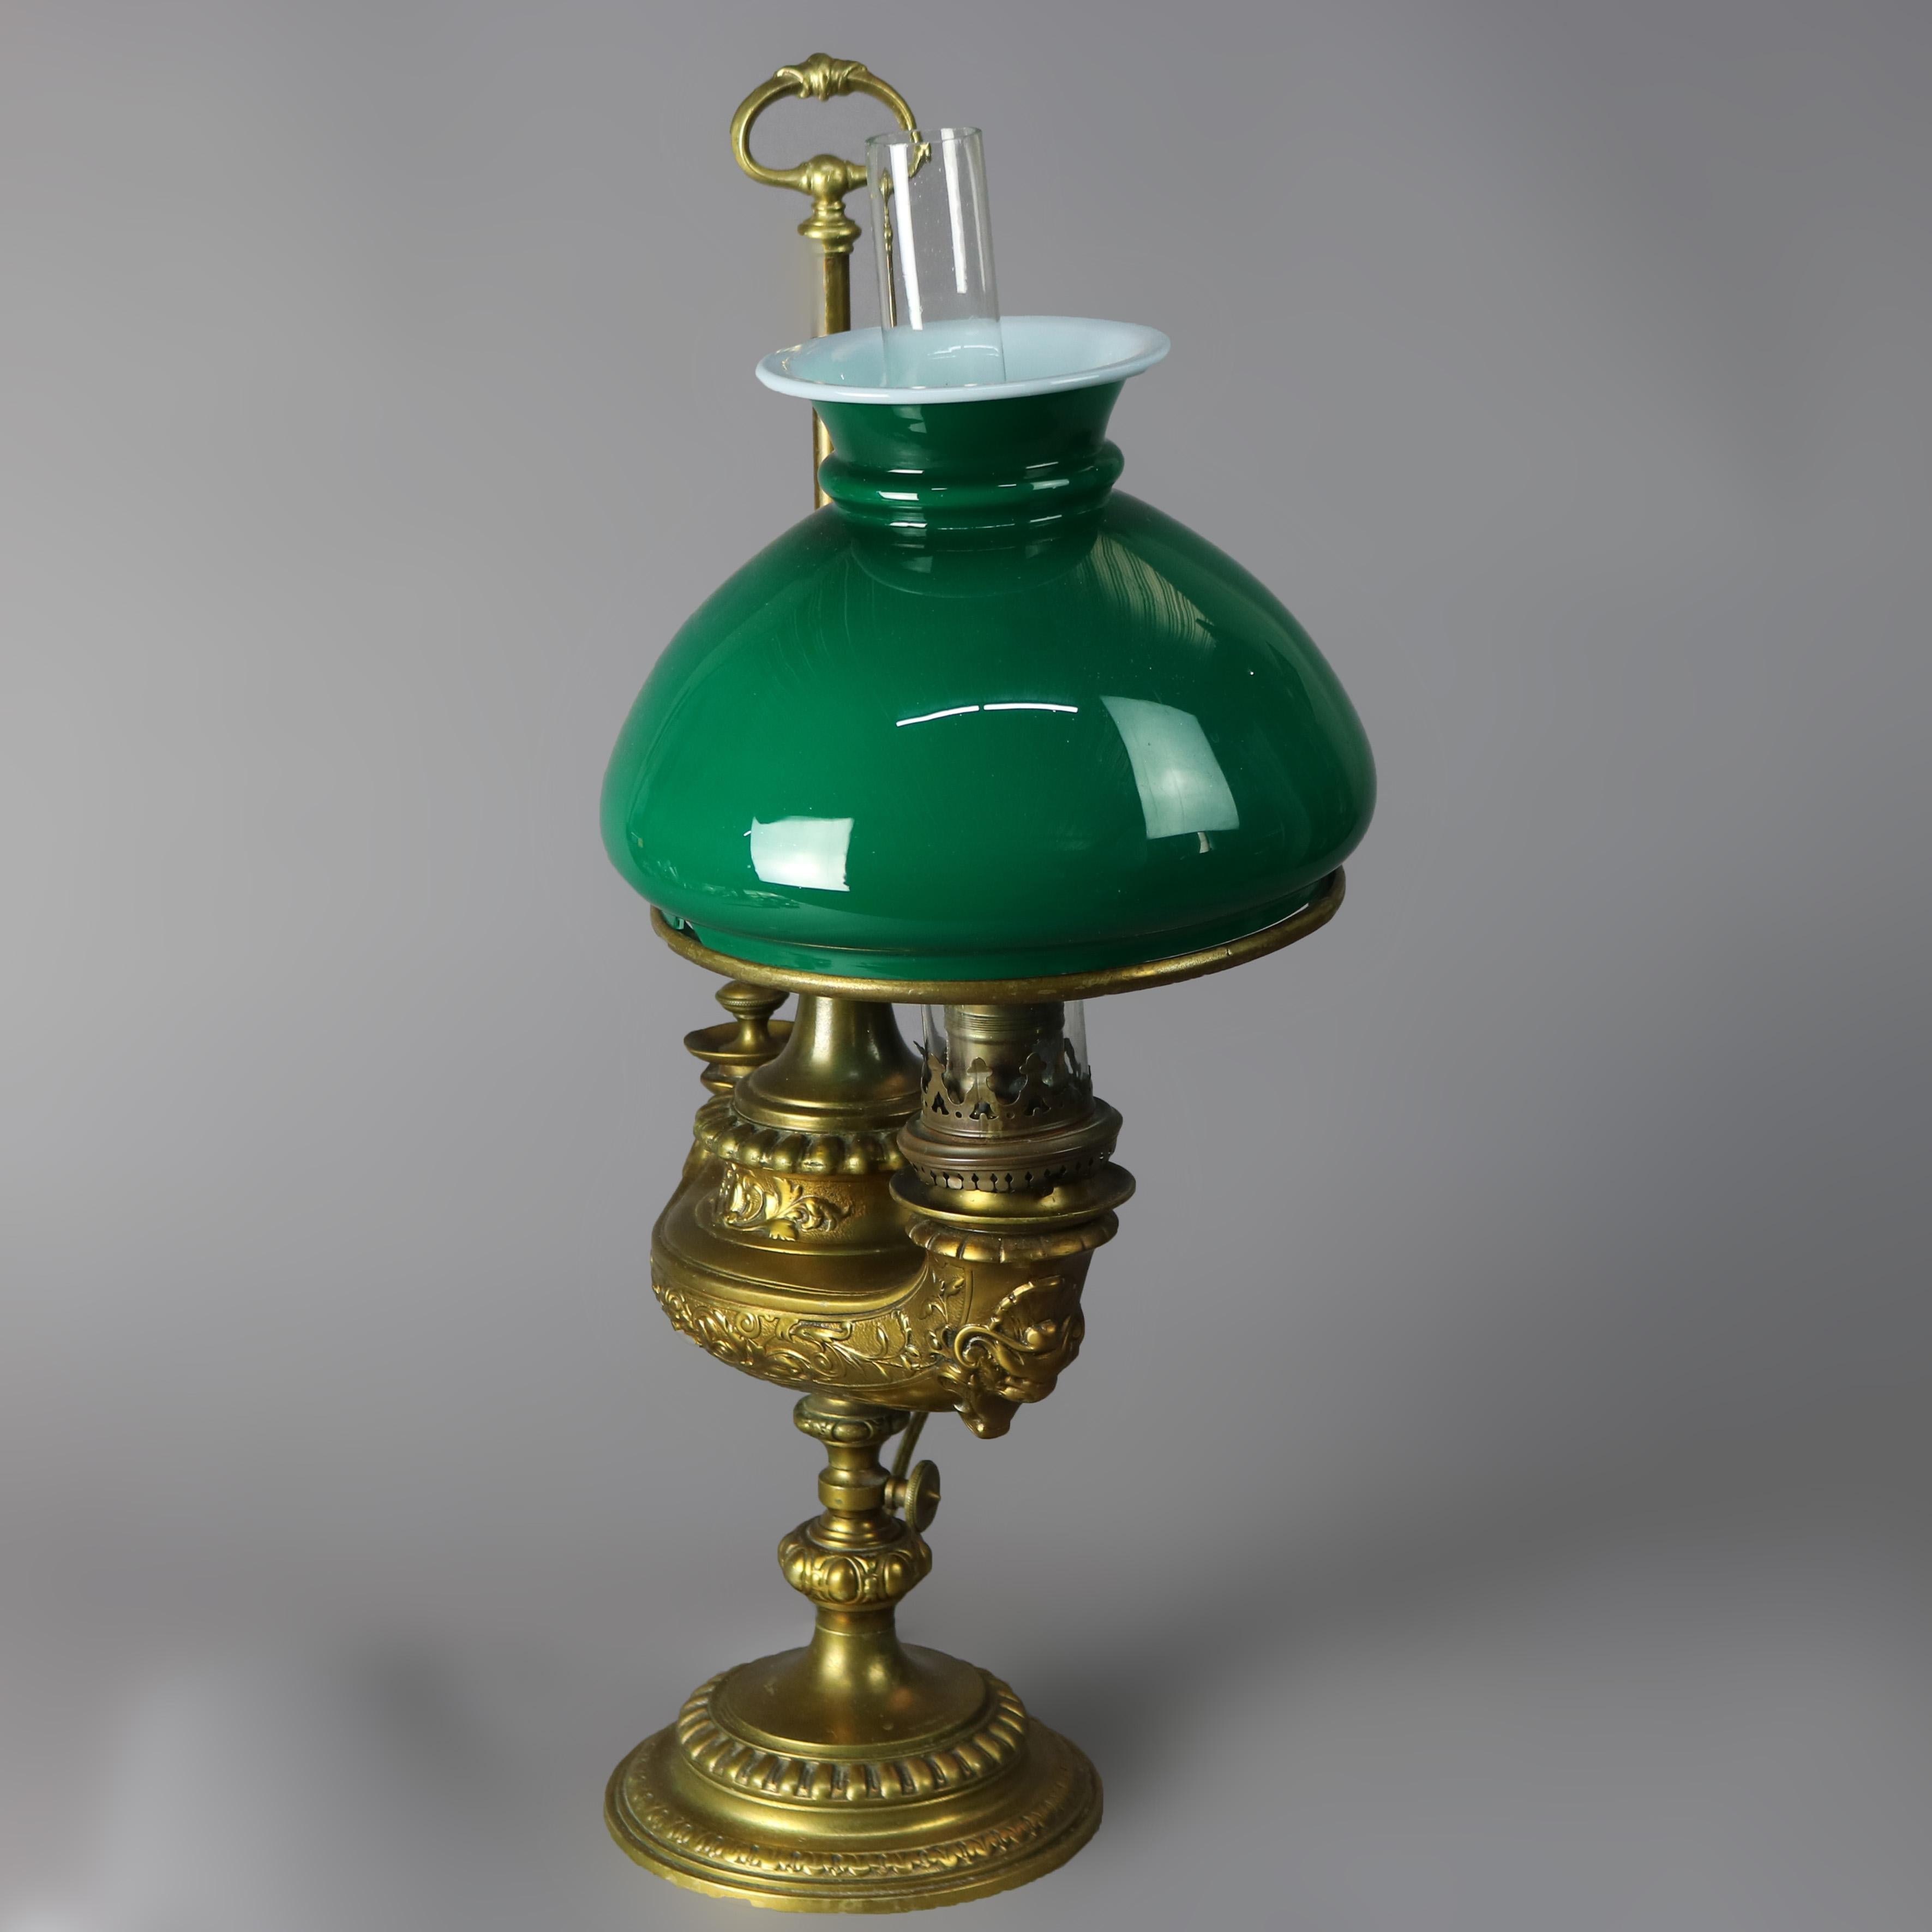 An antique Harvard student lamp offers brass construction with Aladin lamp form and Emeralite shade, electrified, 19th century

Measures - 22.5